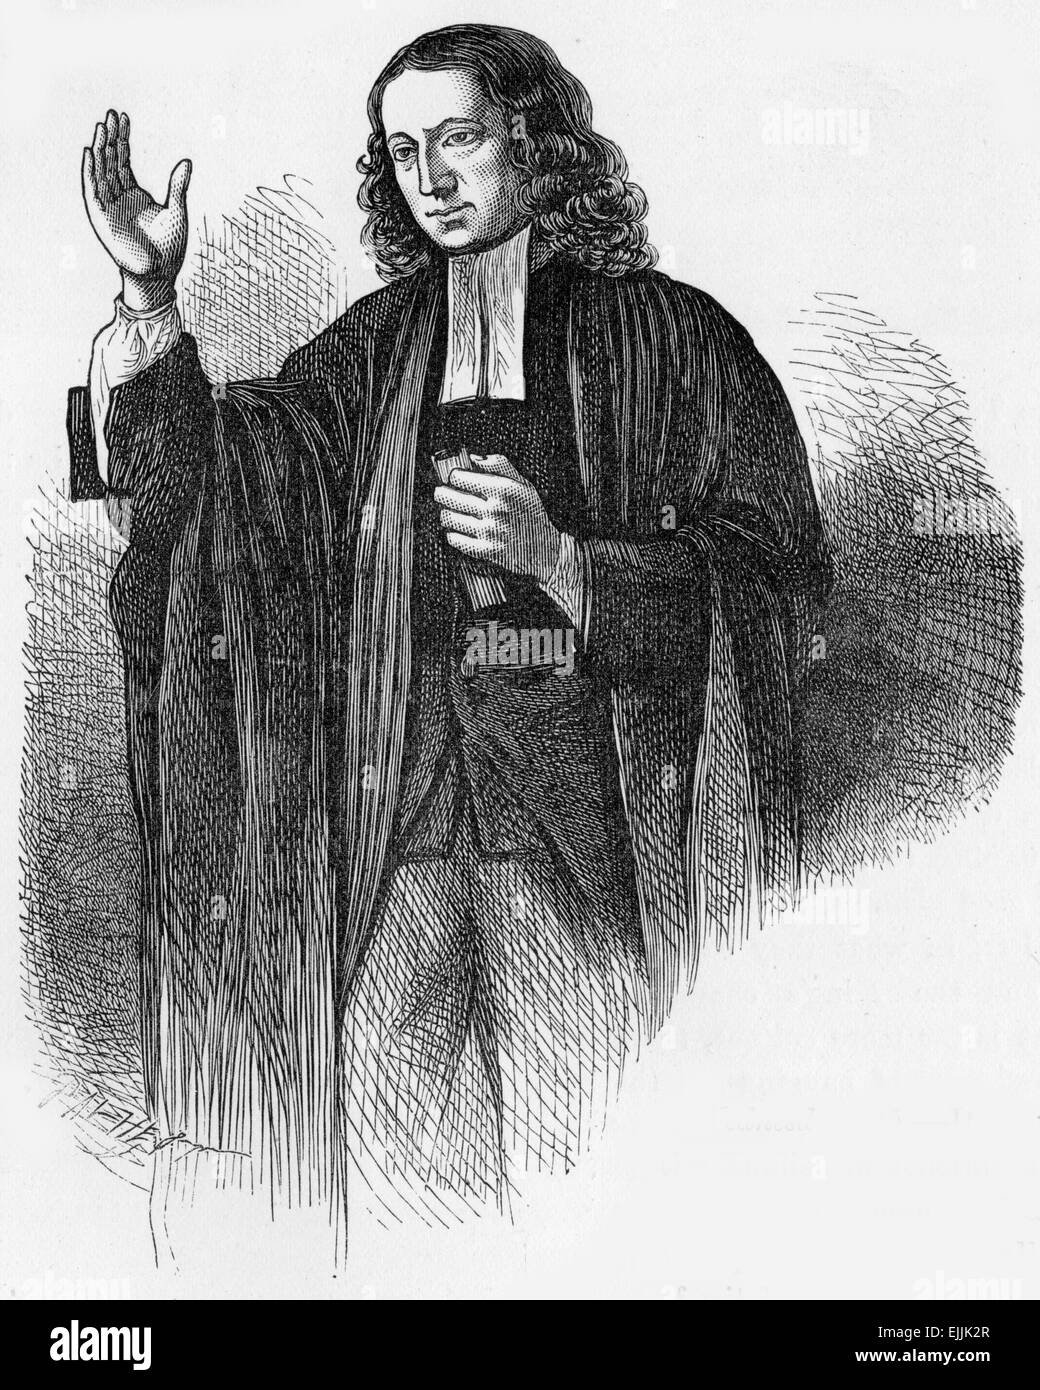 portait of John Wesley preaching at the age of 63,  engraving from Selections from the Journal of John Wesley, 1891 Stock Photo